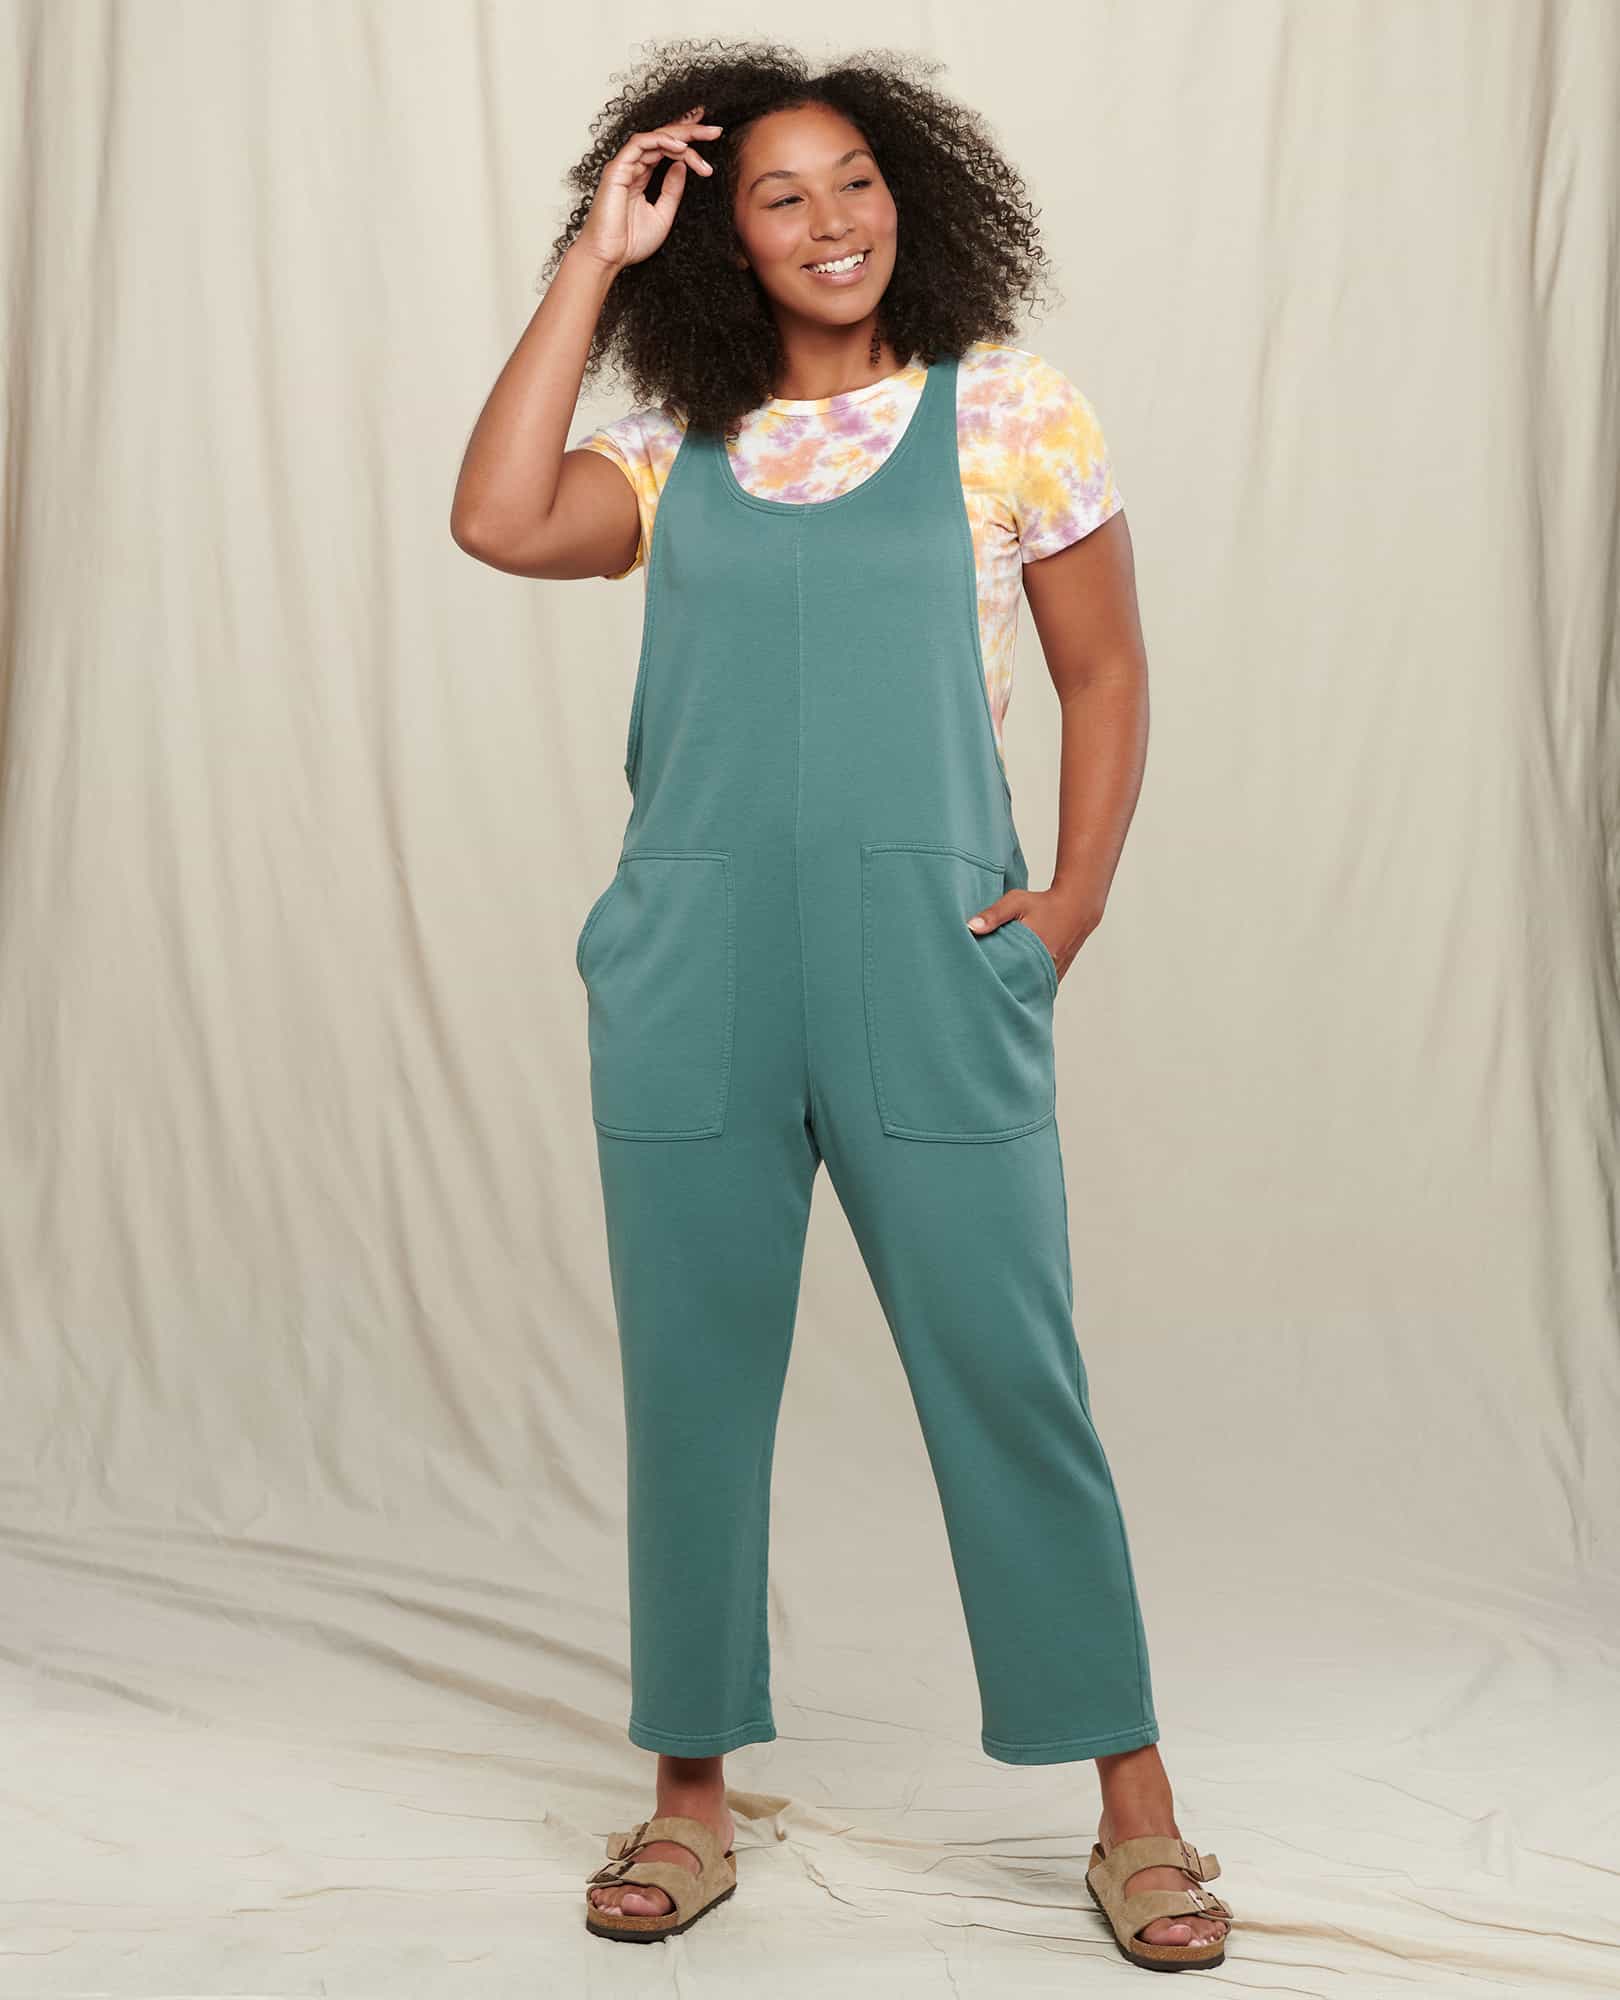 Jumpsuits & Co-ords, Combo Women Top And Leggings